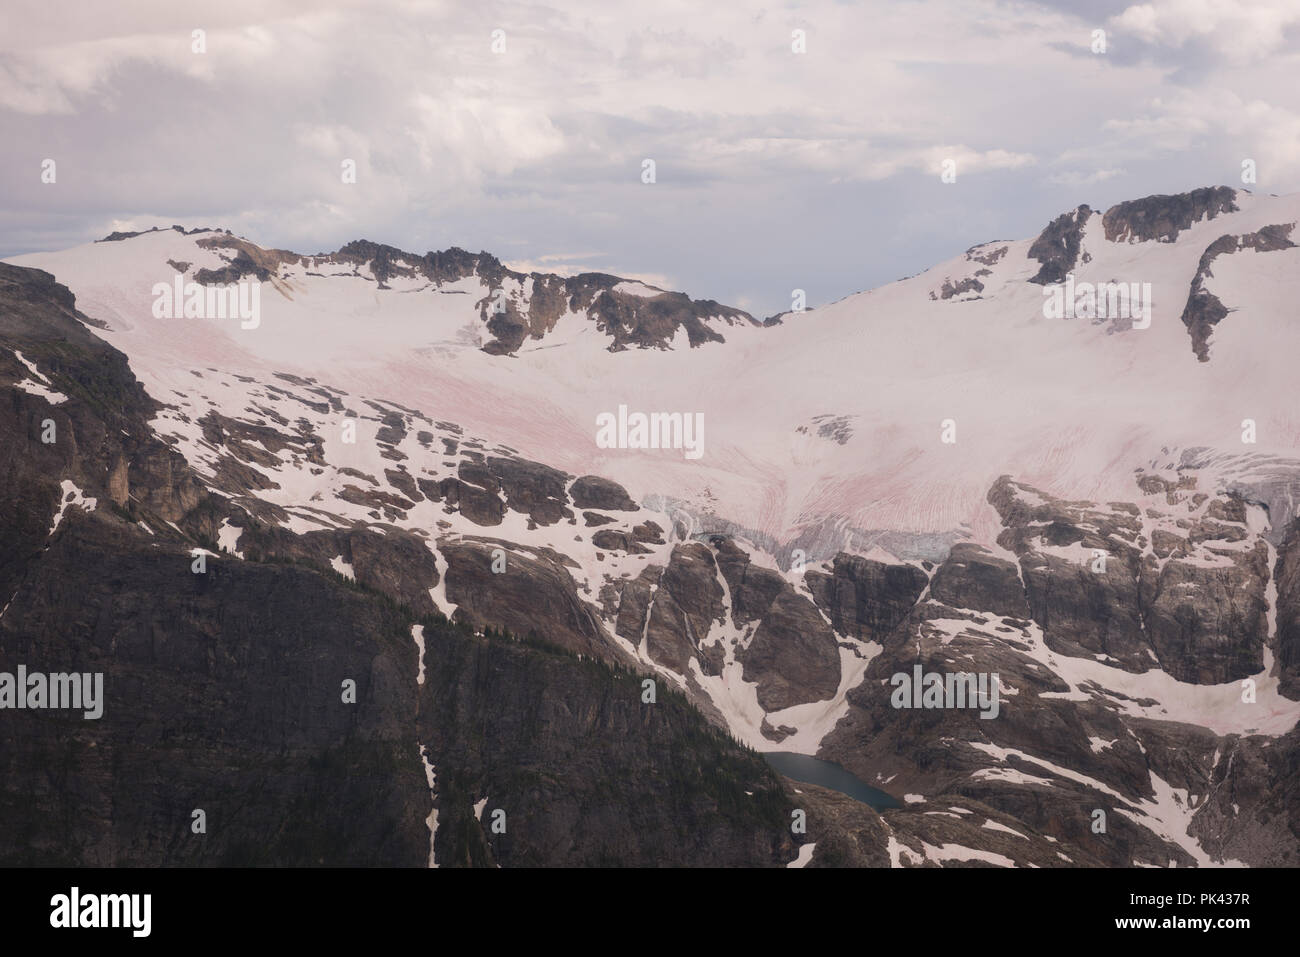 Aerial view of snowcapped mountains Stock Photo